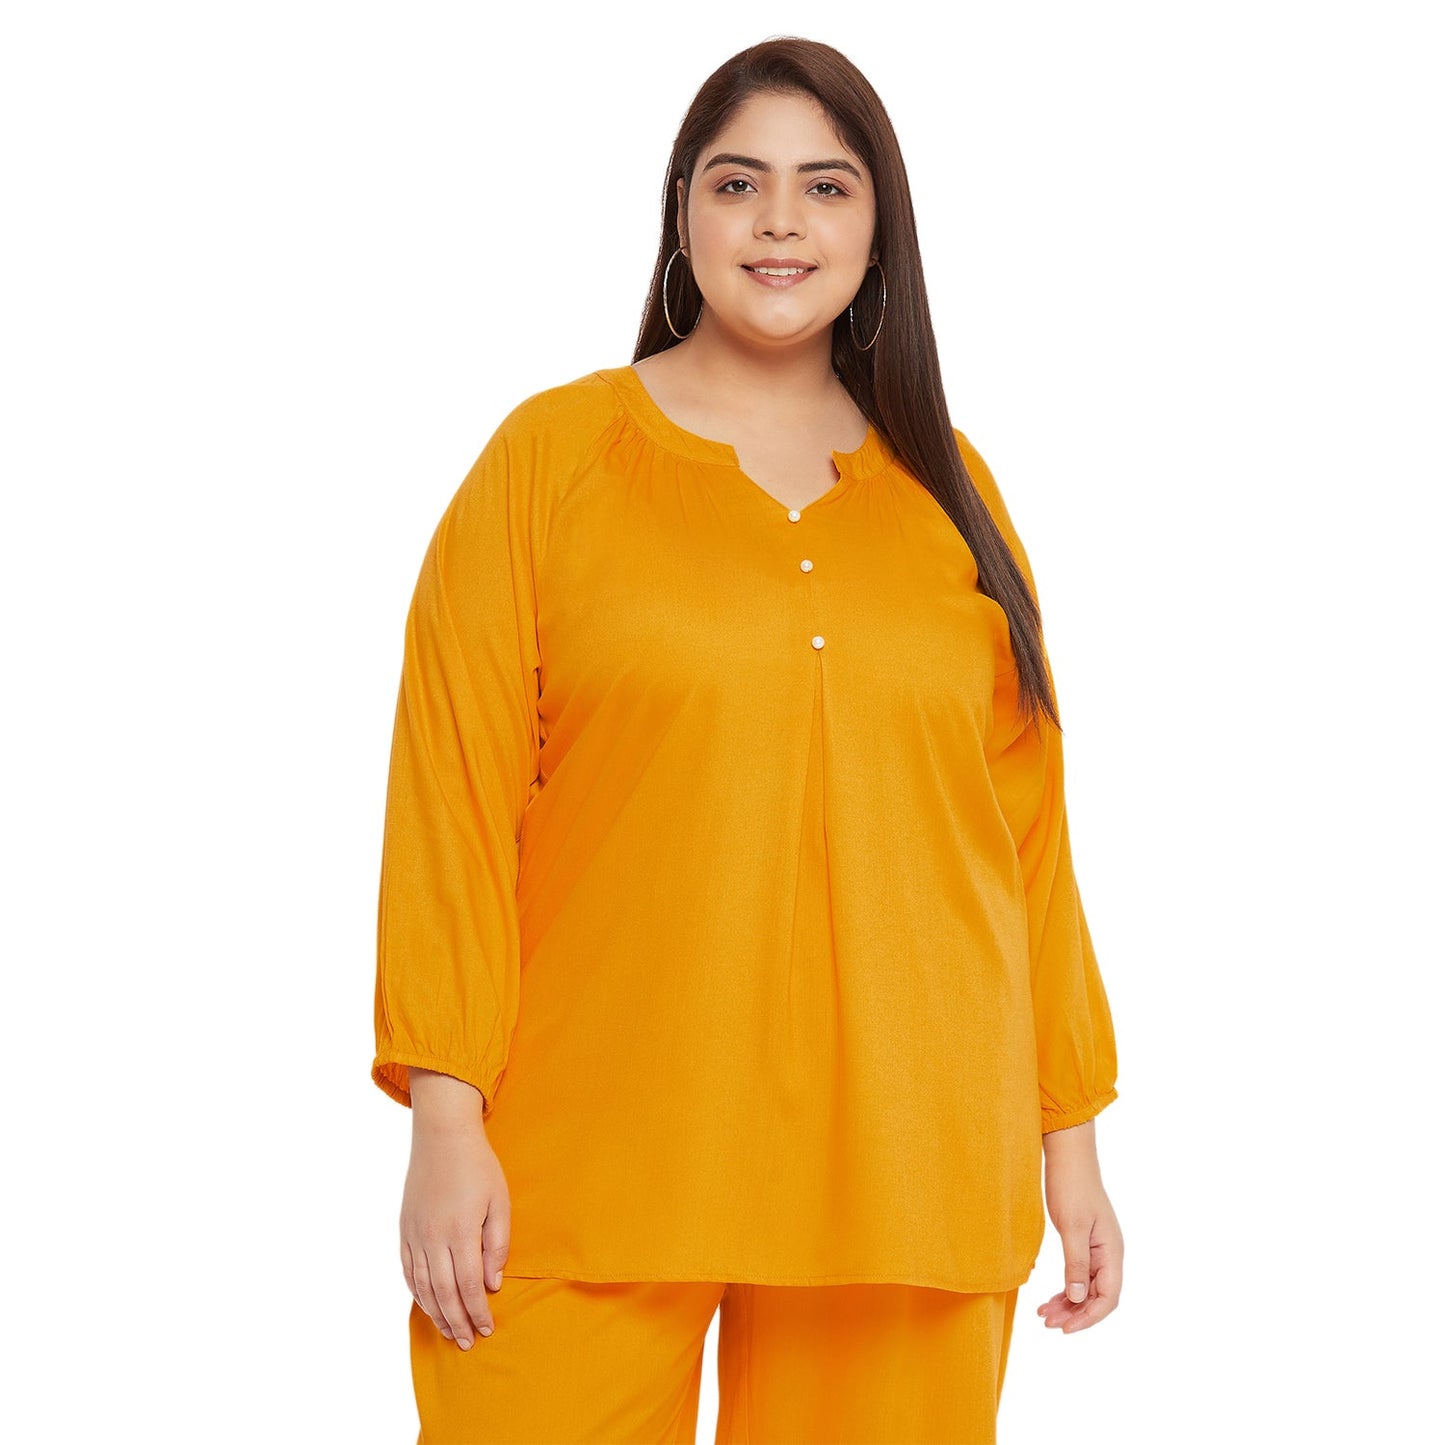 VINAAN SOLID YELLOW WITH PEARL TOP